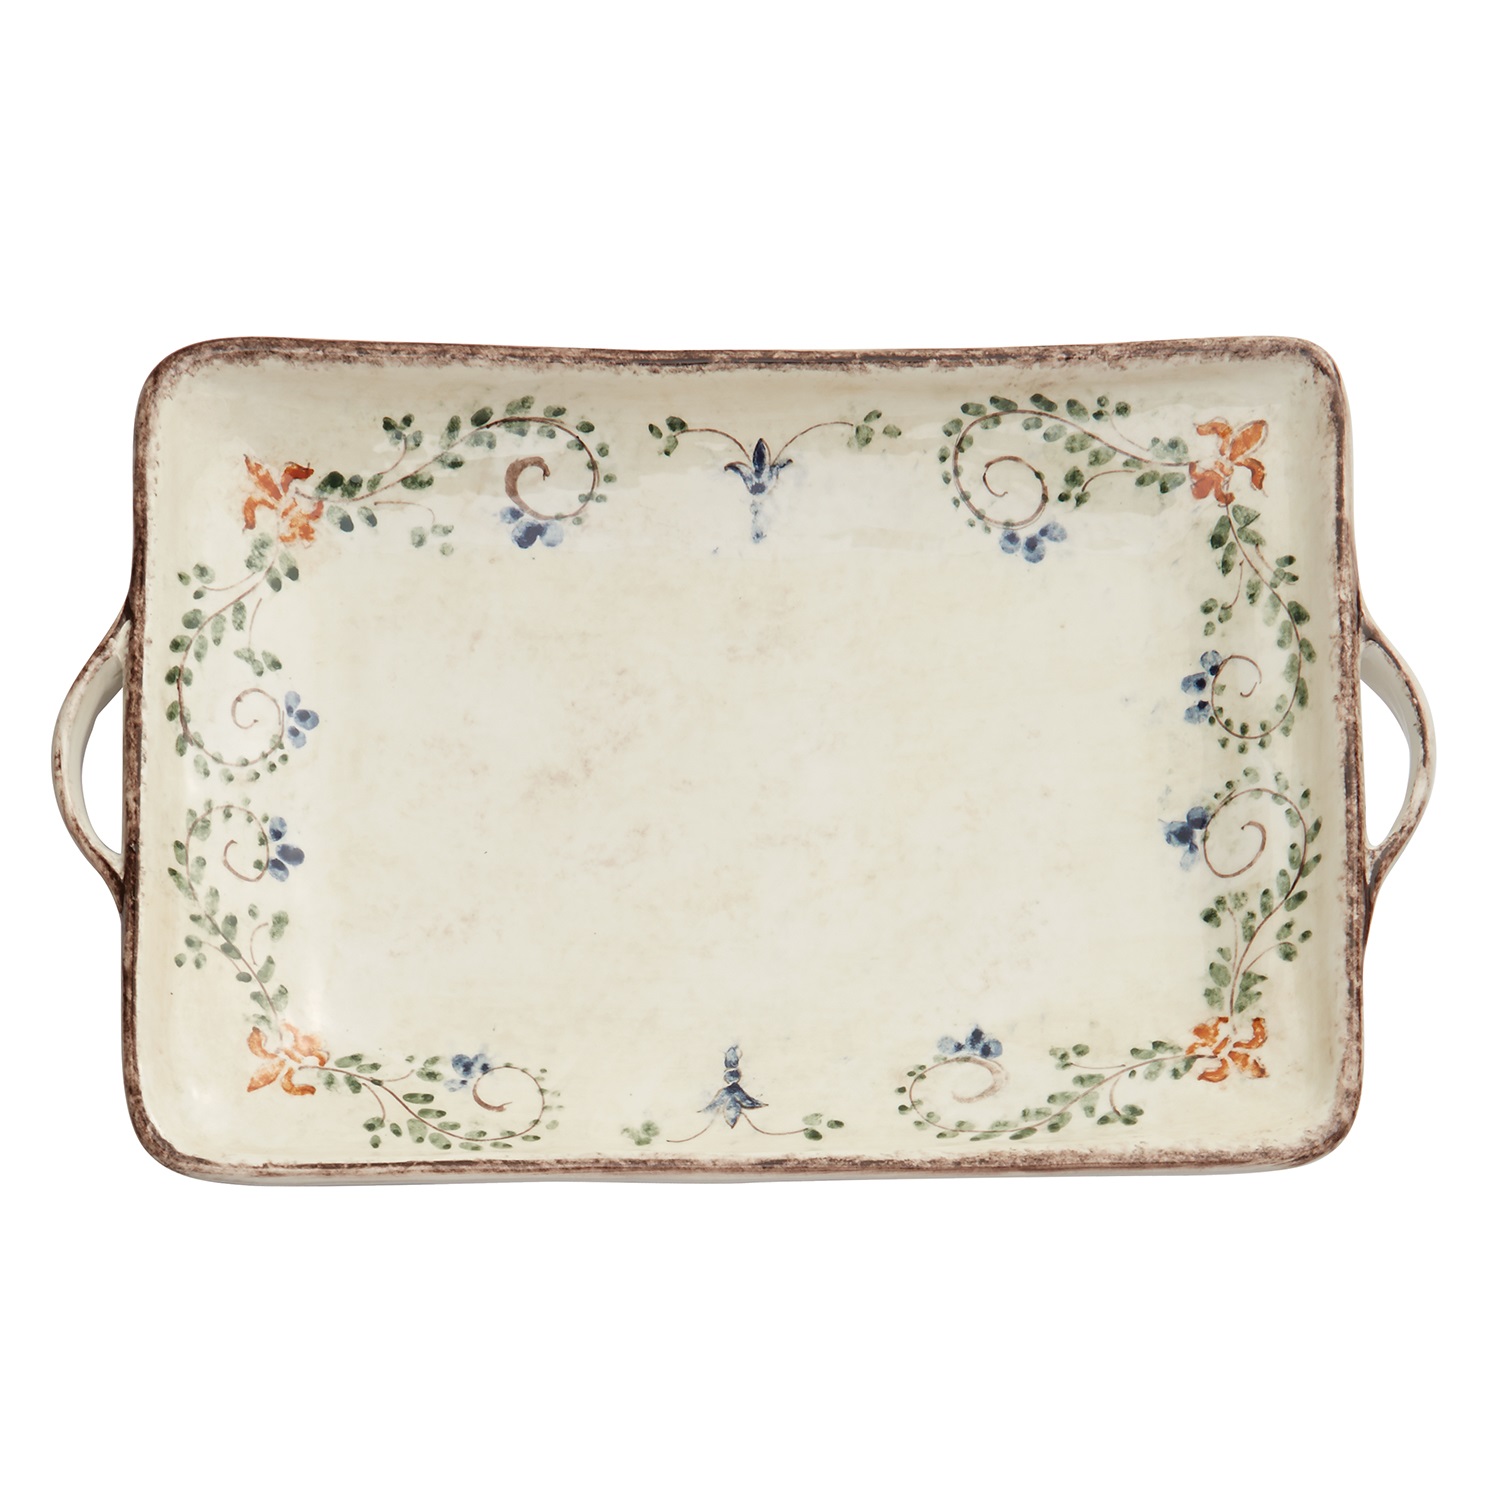 arte-italica-tray-with-handles-large-21x12.75x2.25-in-med6836.jpg